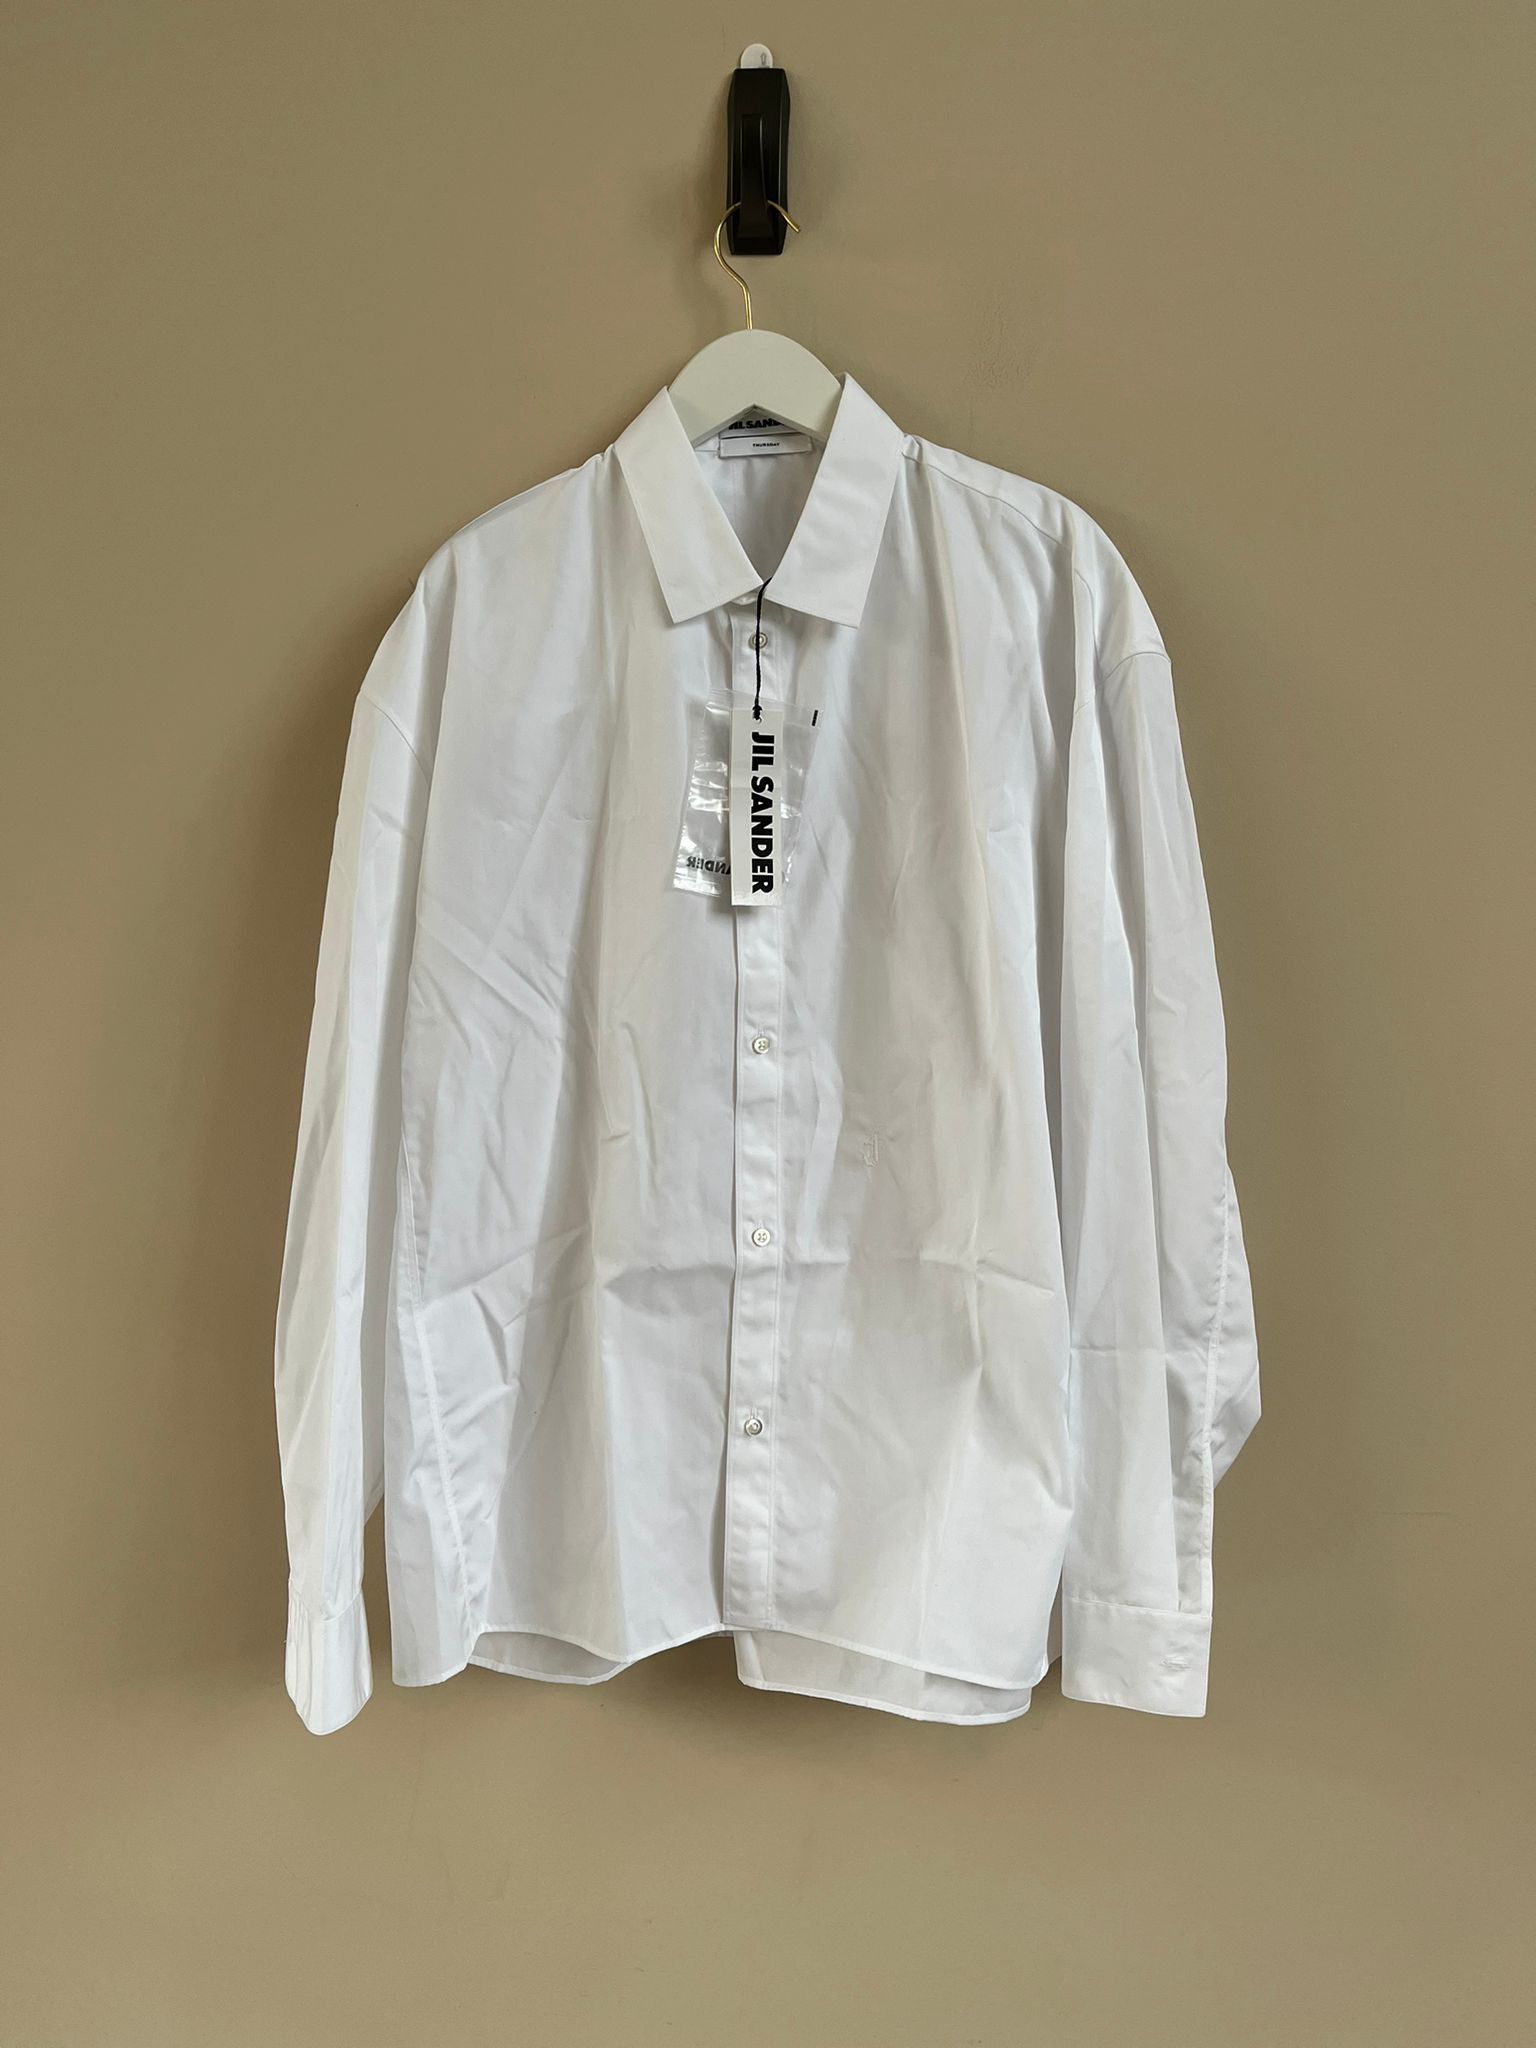 Jil Sander Embroidered Thursday Button Up in White Size US M / EU 48-50 / 2 - 2 Preview